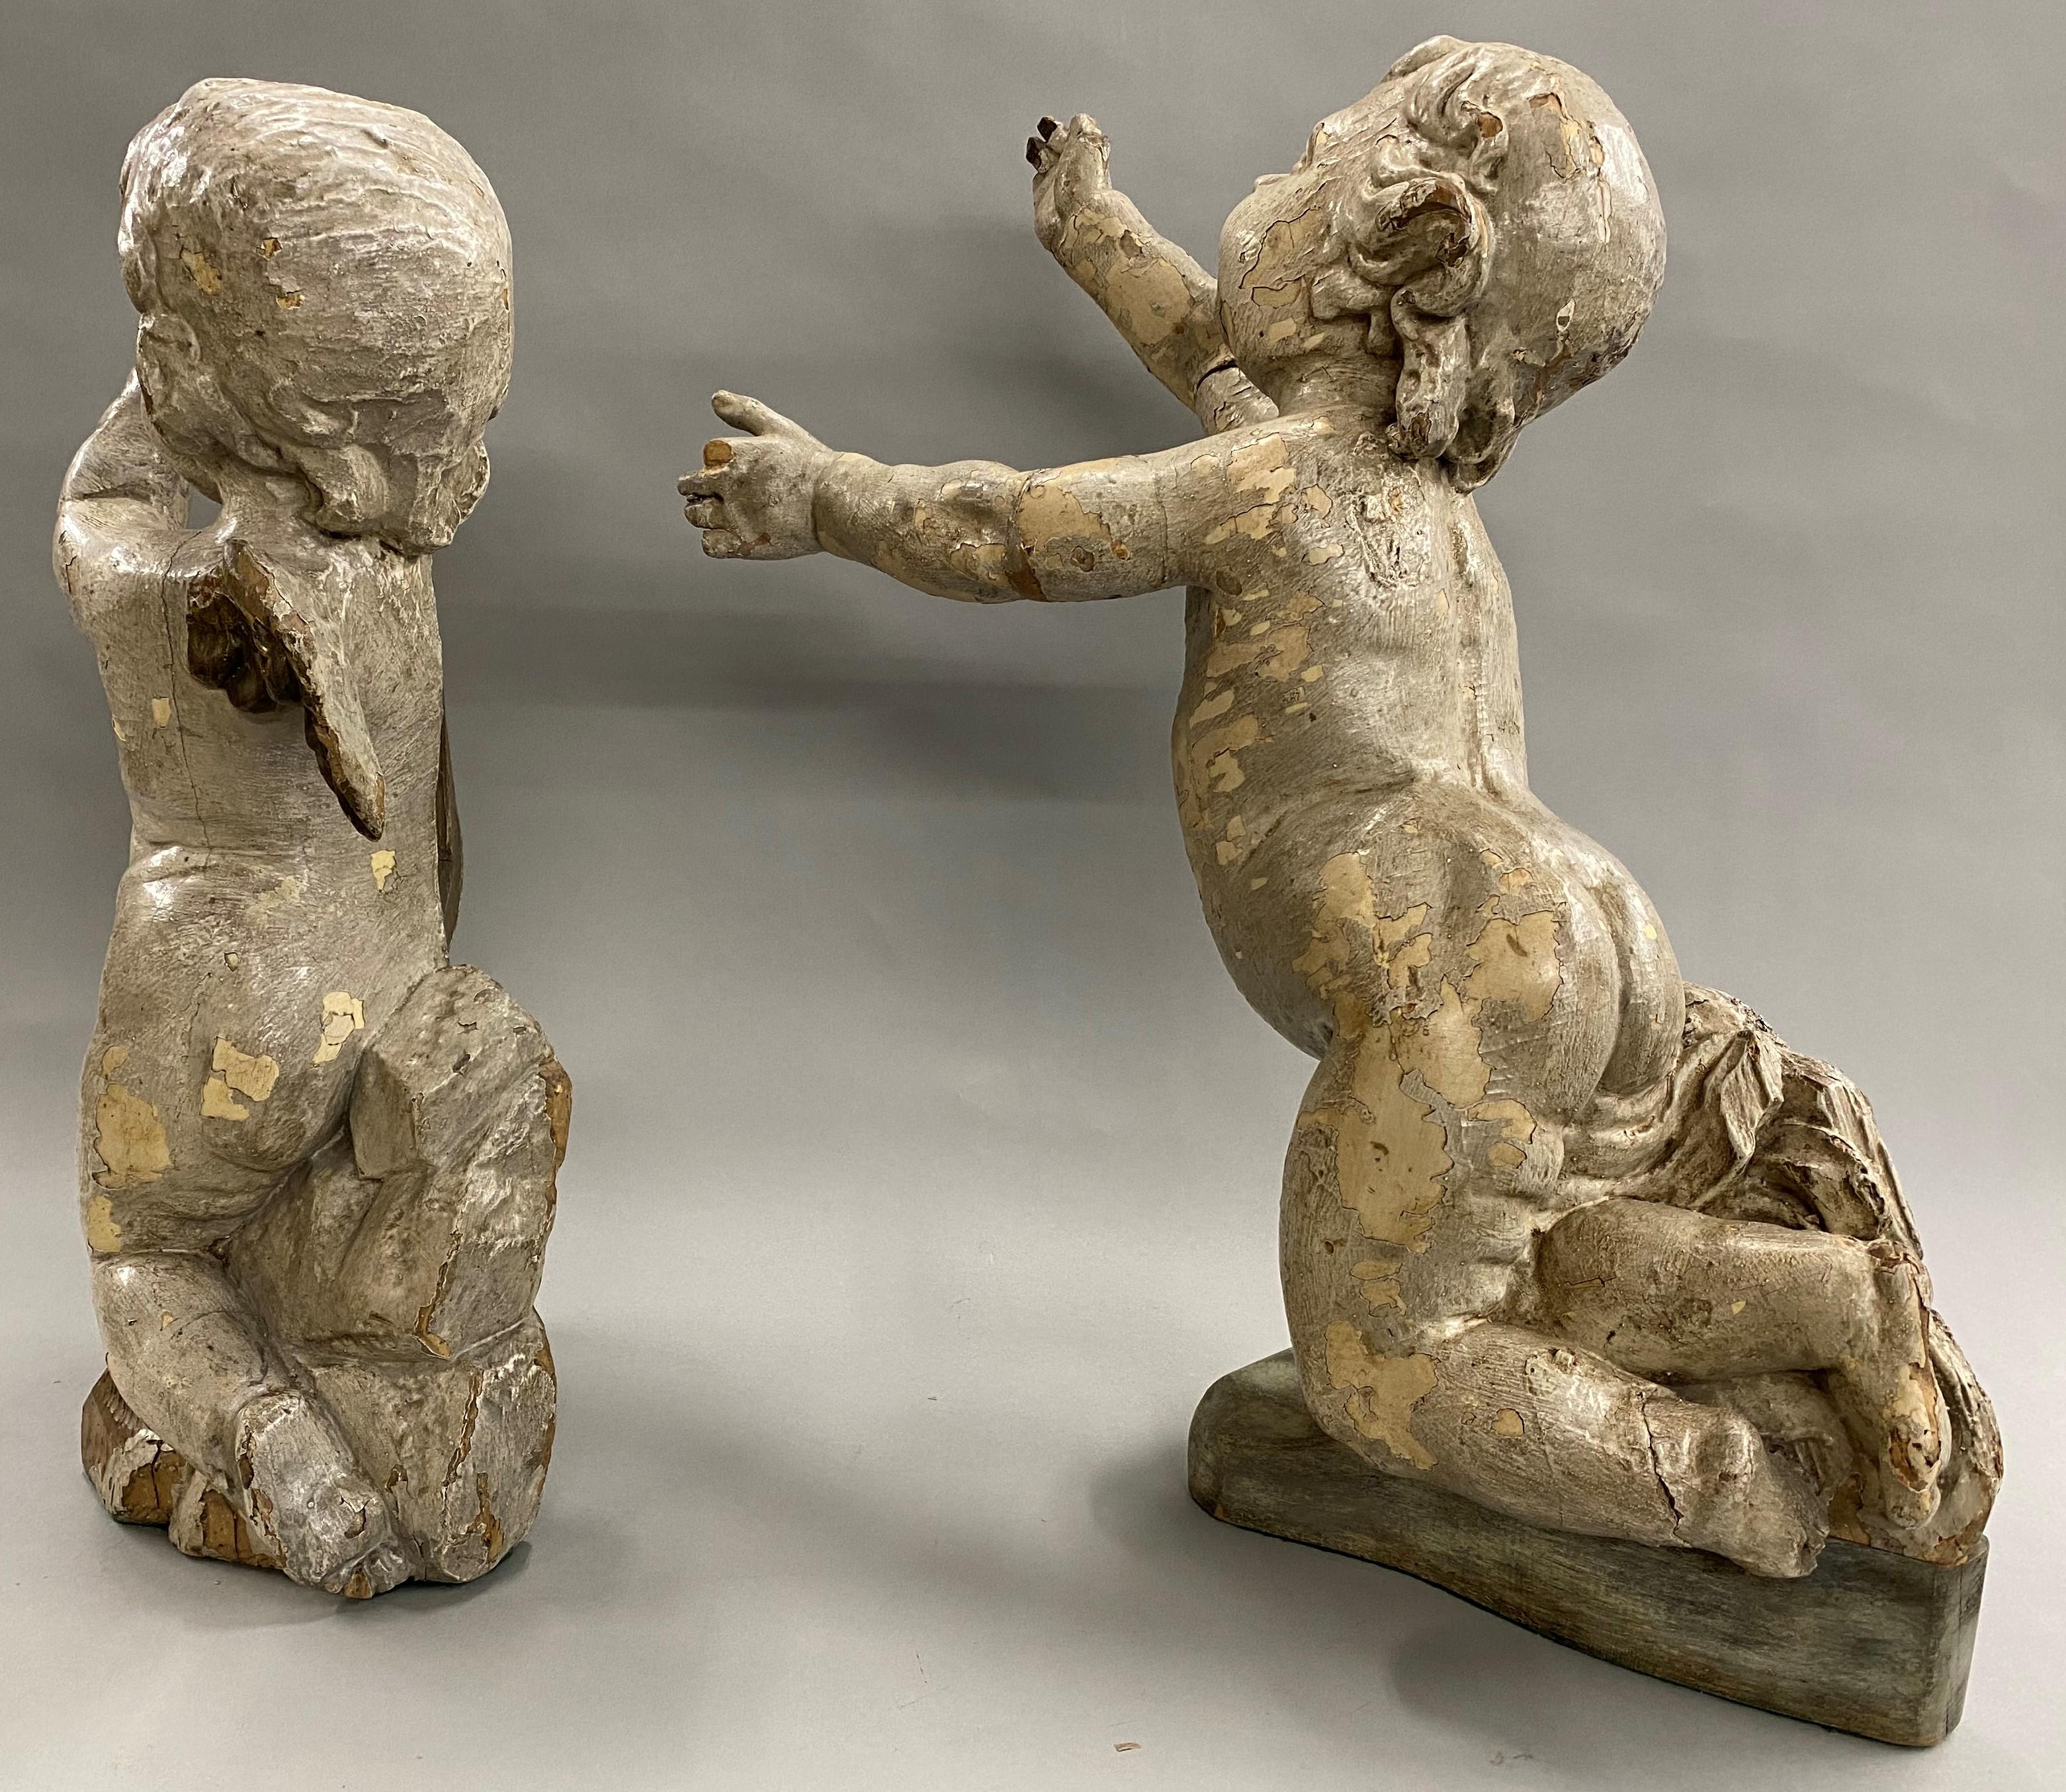 A fine pair of architectural solid wooden carved winged putti with paint and gesso surface, one in a praying position and one with outstretched arms and legs. Probably Venetian, dating to the 17th century in good overall condition, with some paint